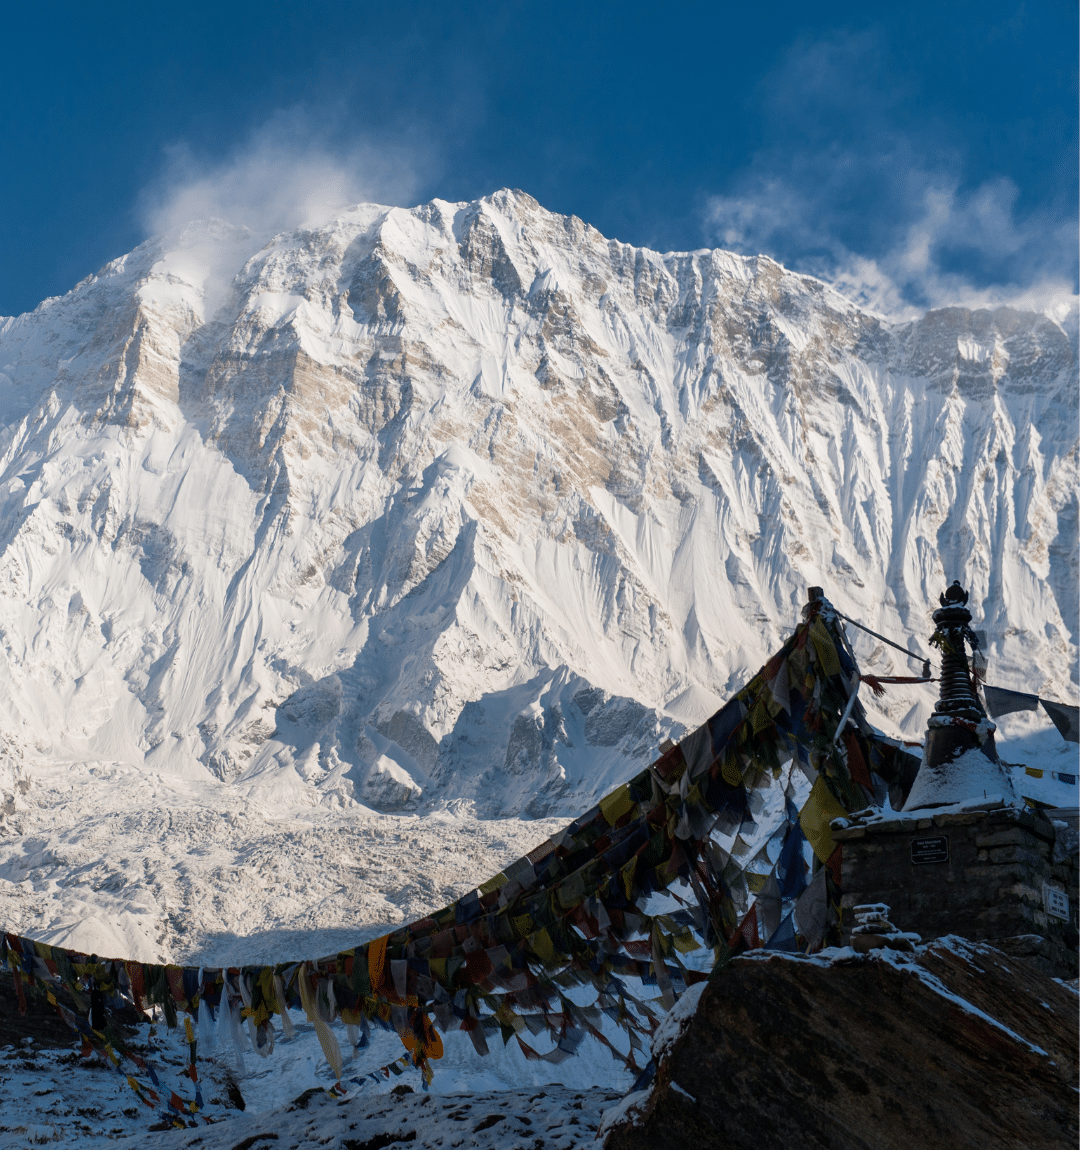 When is the best time to trek to Annapurna Base Camp? - 2